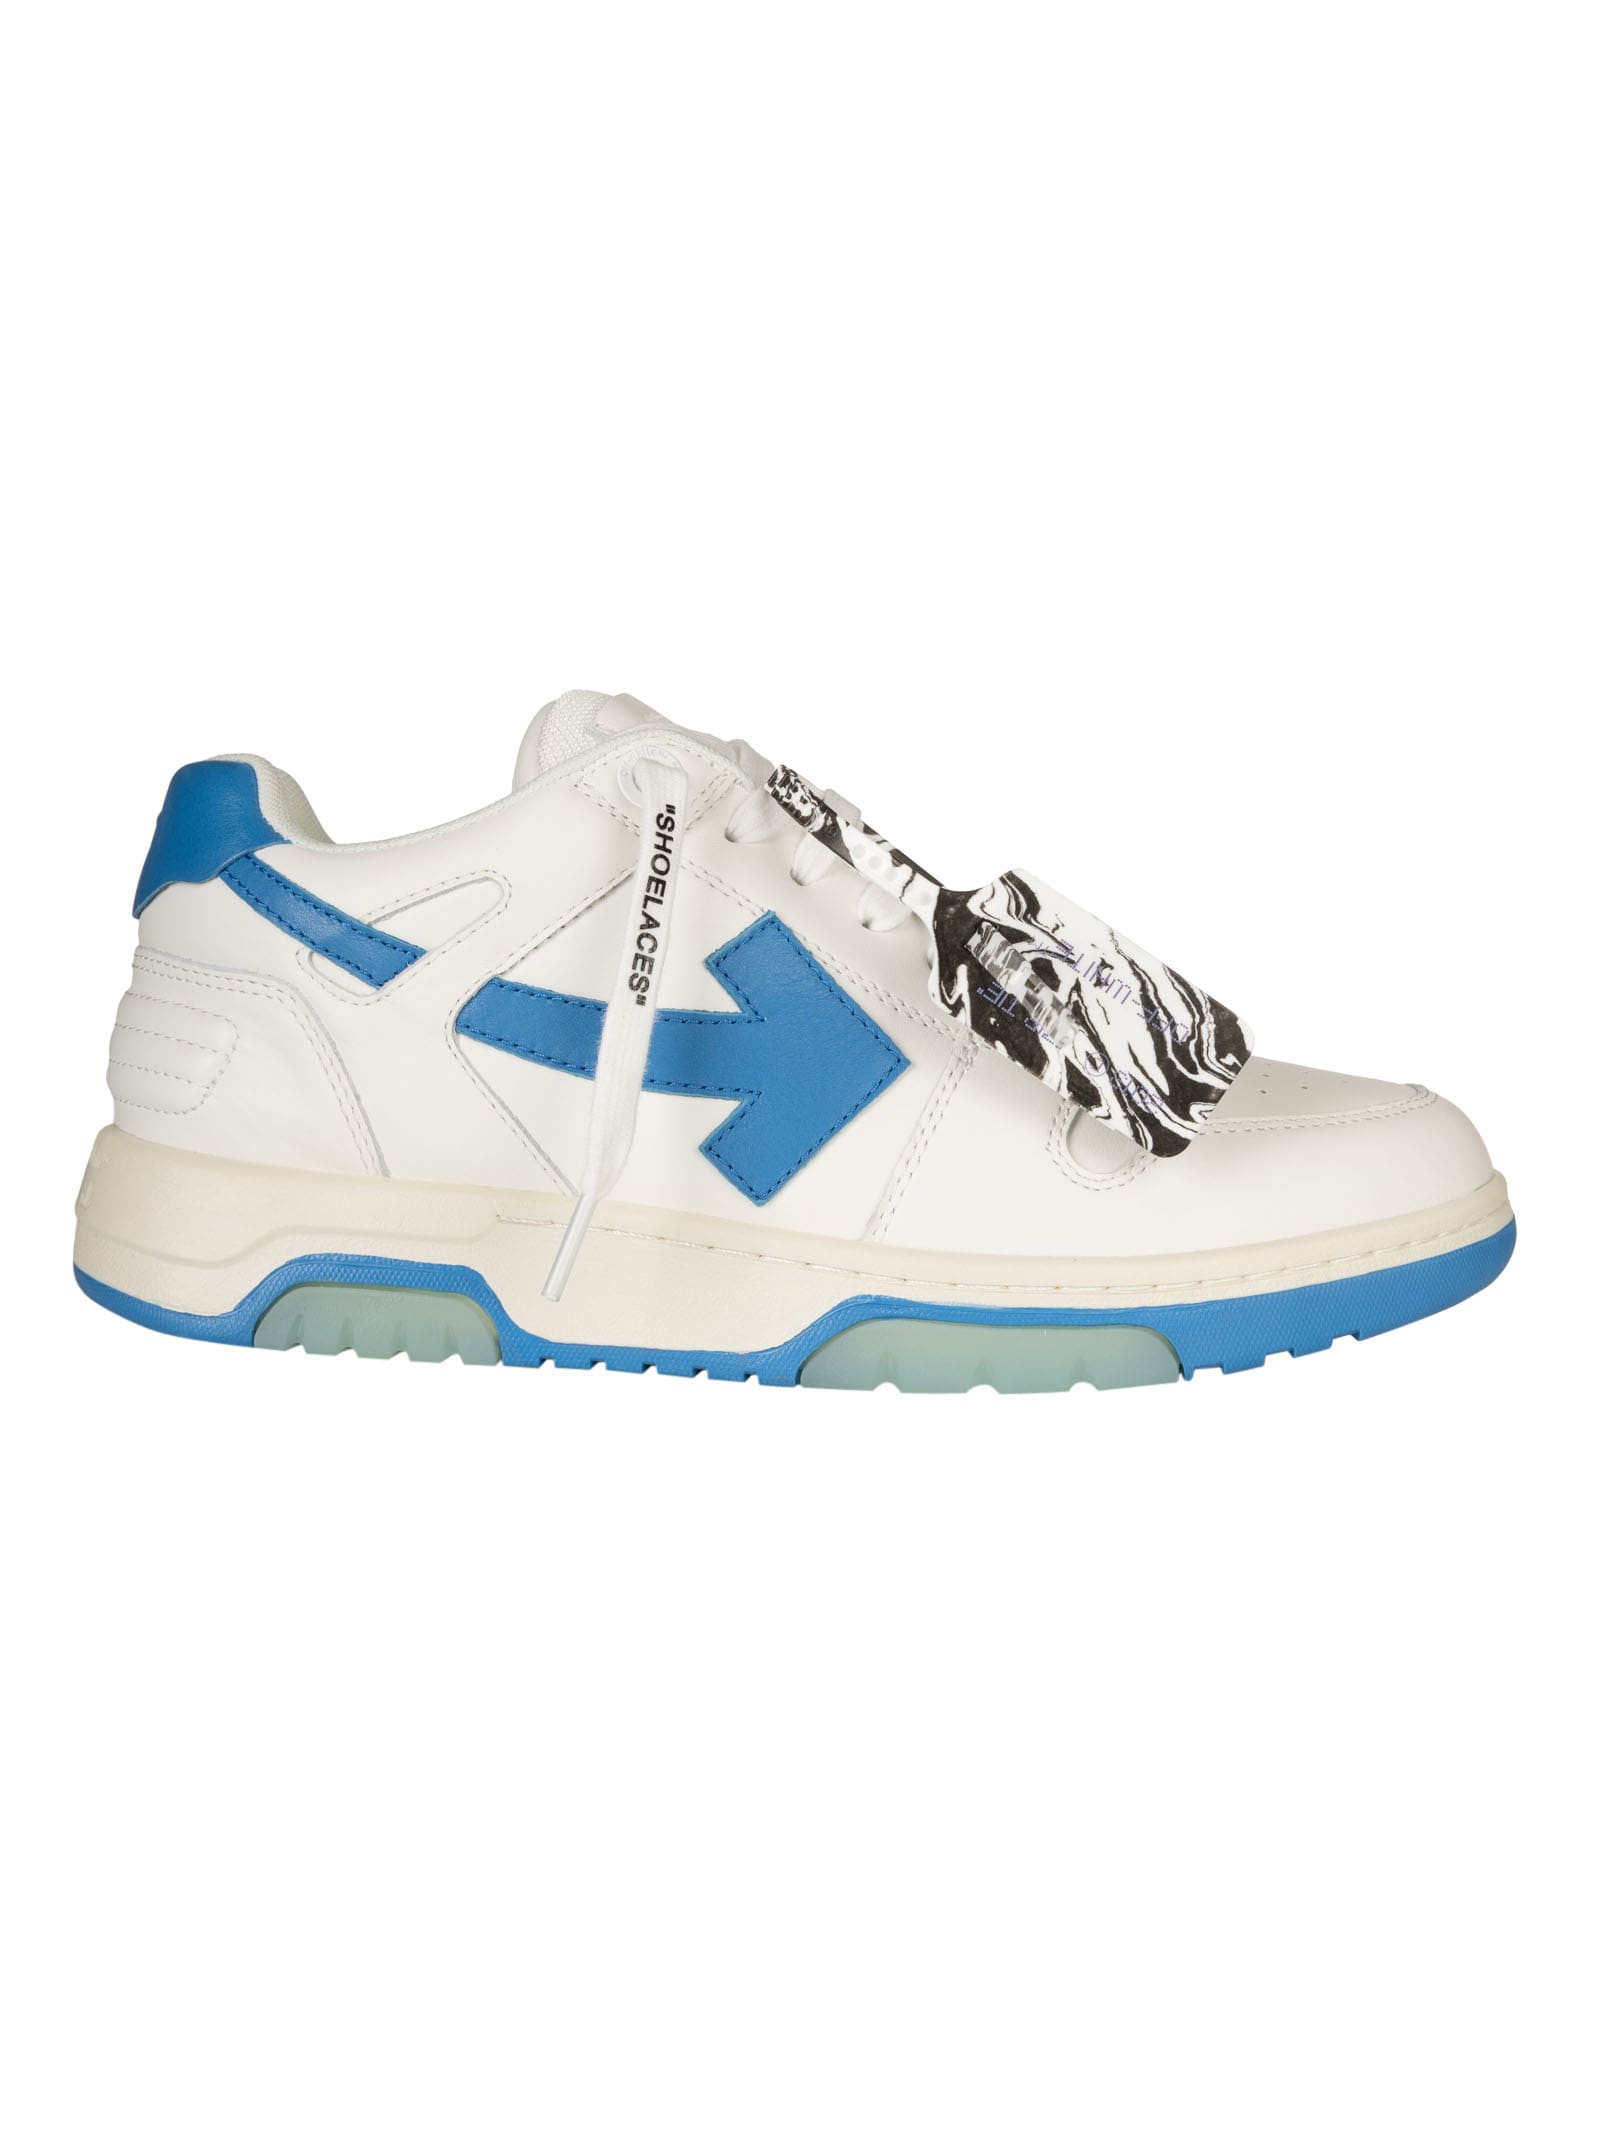 OFF-WHITE OUT OF OFFICE WALKING CALF SNEAKERS,OMIA189R21LEA001 0145 WHITE BLUE